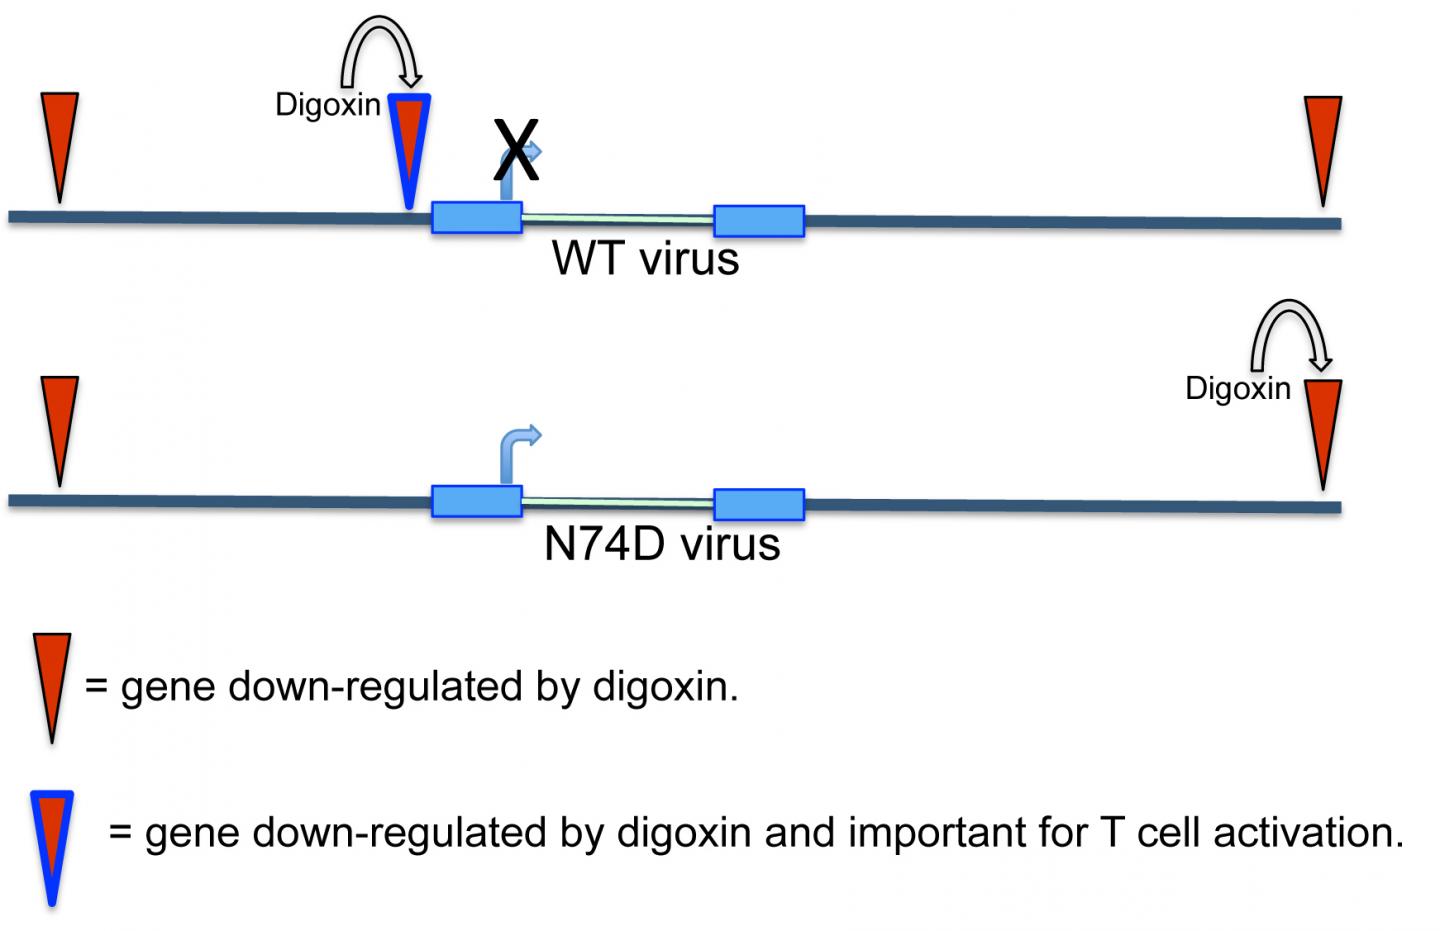 Heart Toxin Reveals New Insights Into HIV-1 Integration in T Cell Genome